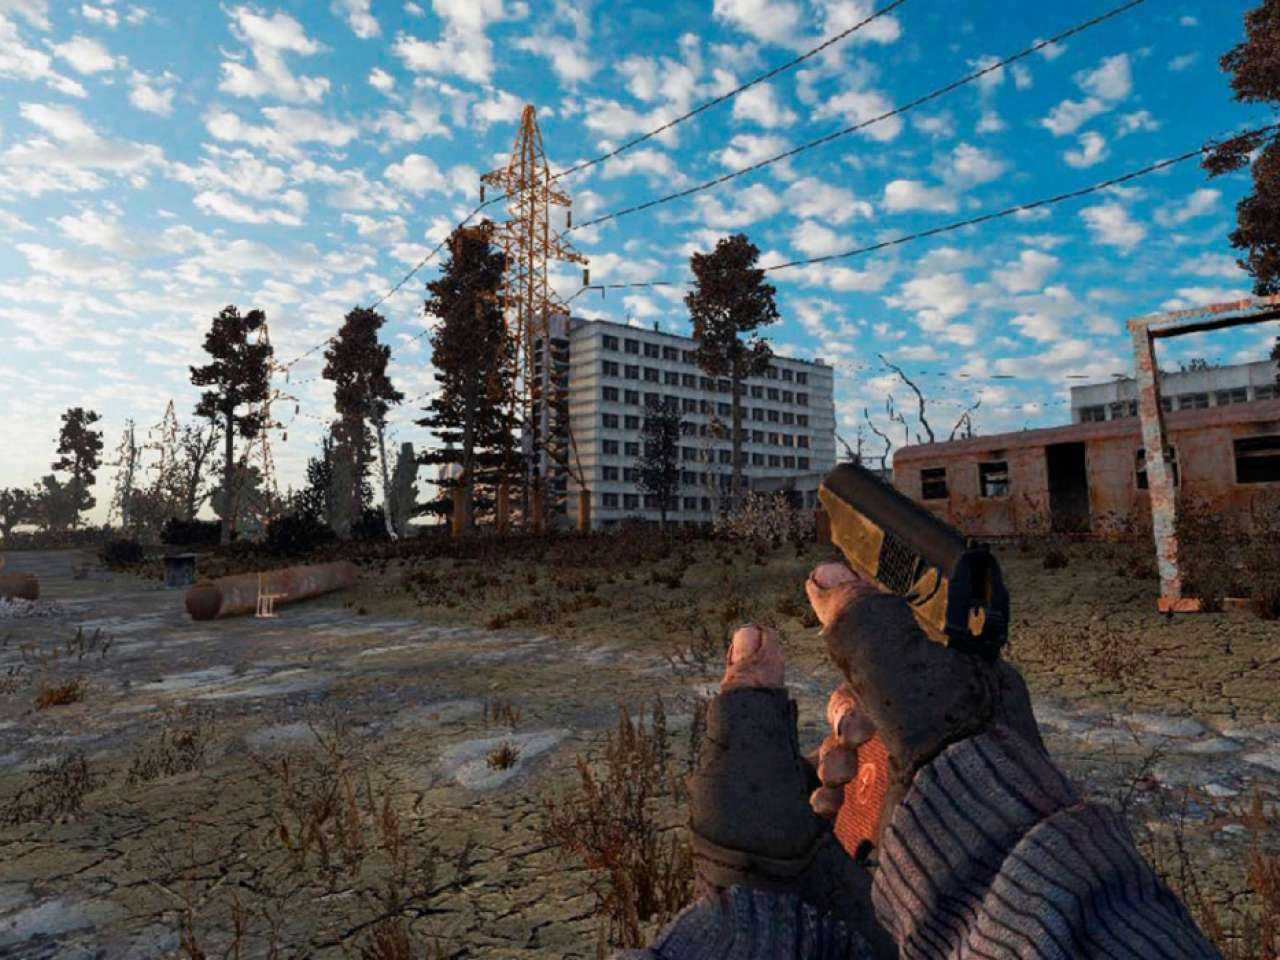 Call of chernobyl anomaly. Сталкер аномалия. Stalker аномалии. Stalker Redux 1.1. Сталкер аномалия 152.